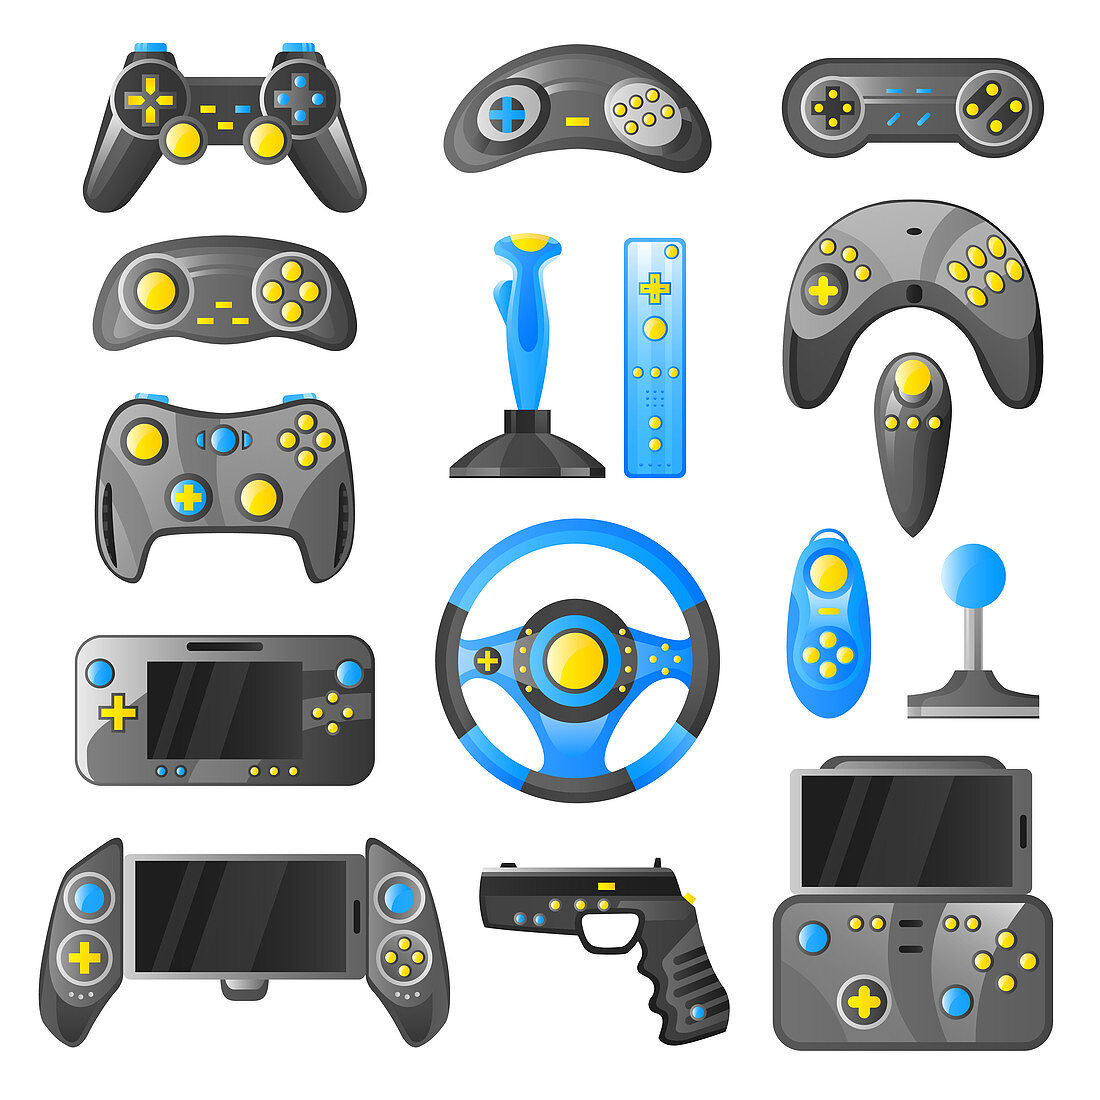 Video game controller icons, illustration